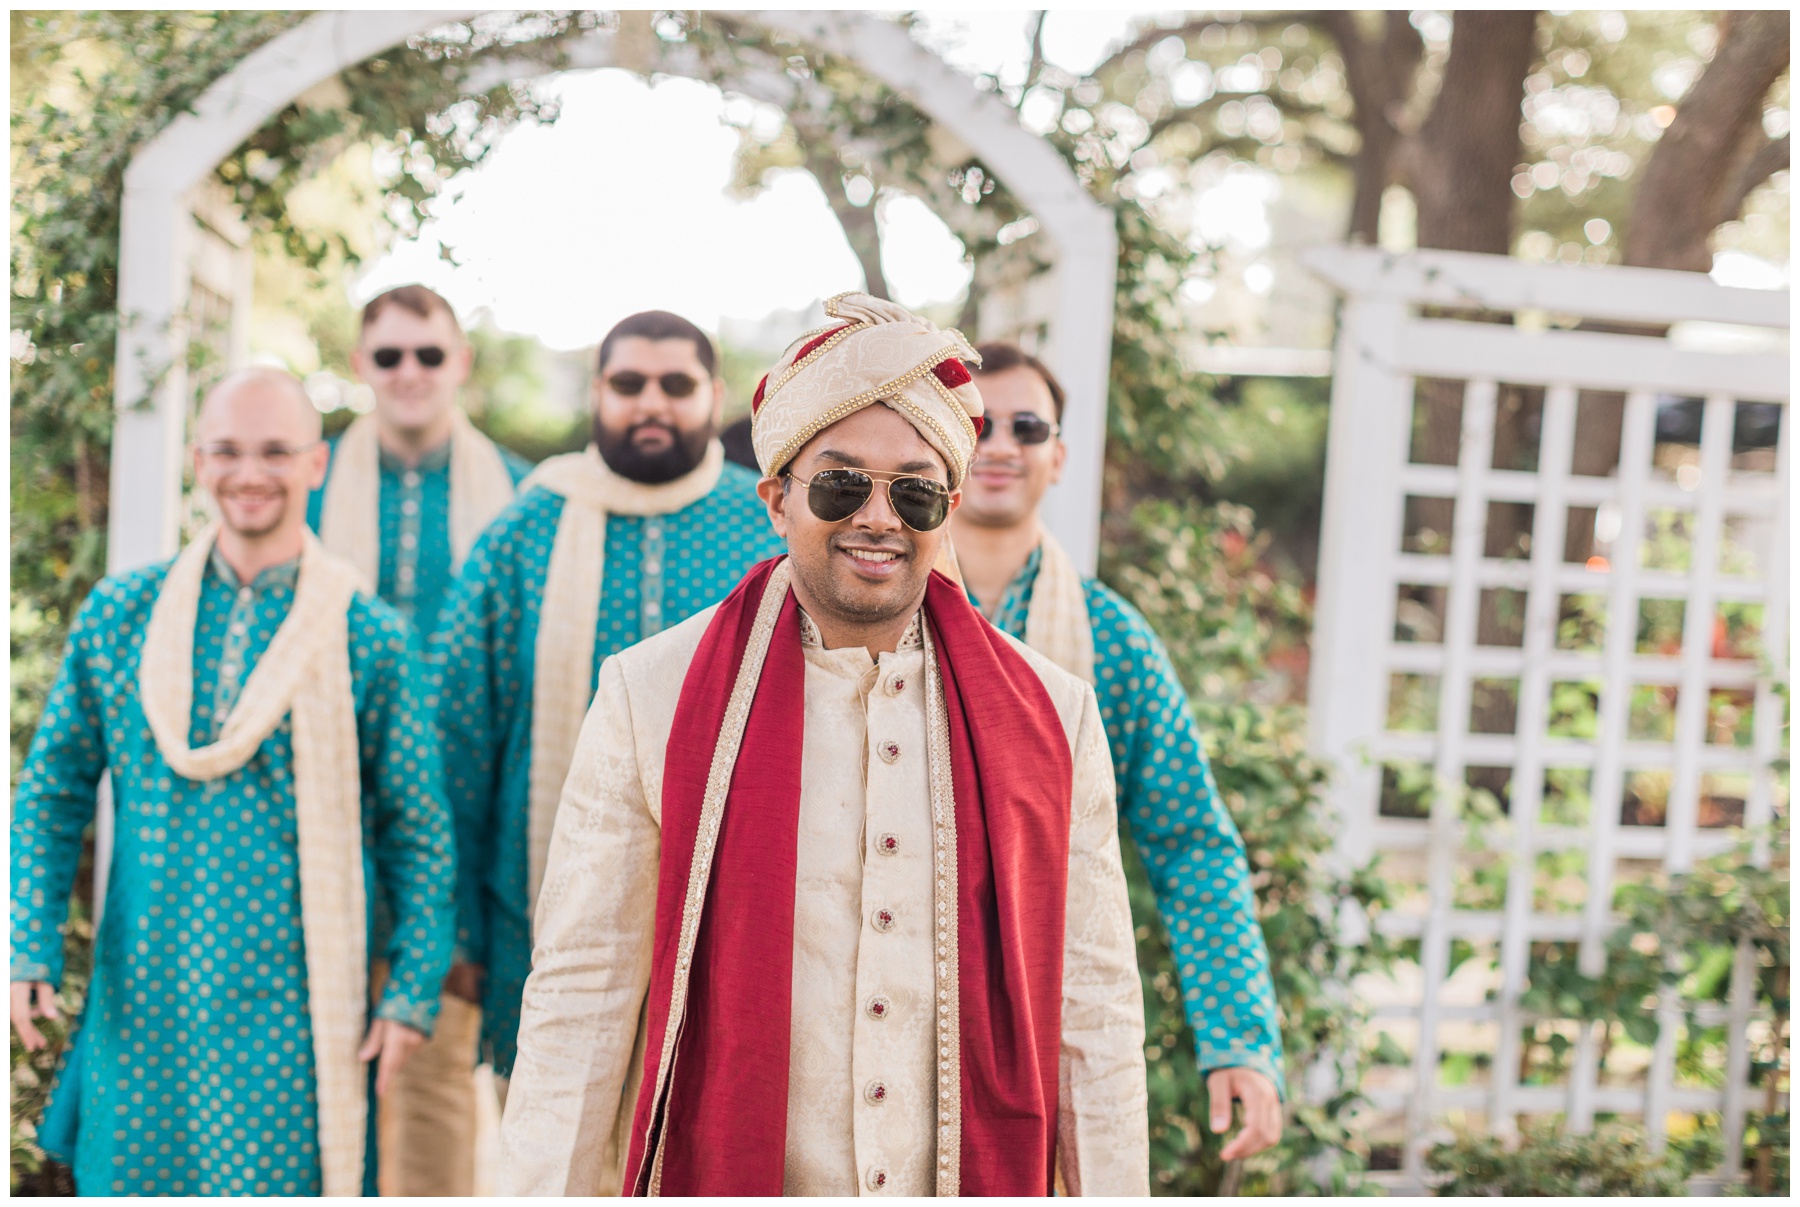 Groom wearing a gold sherwani and a red dupatta from Maharani Fashions